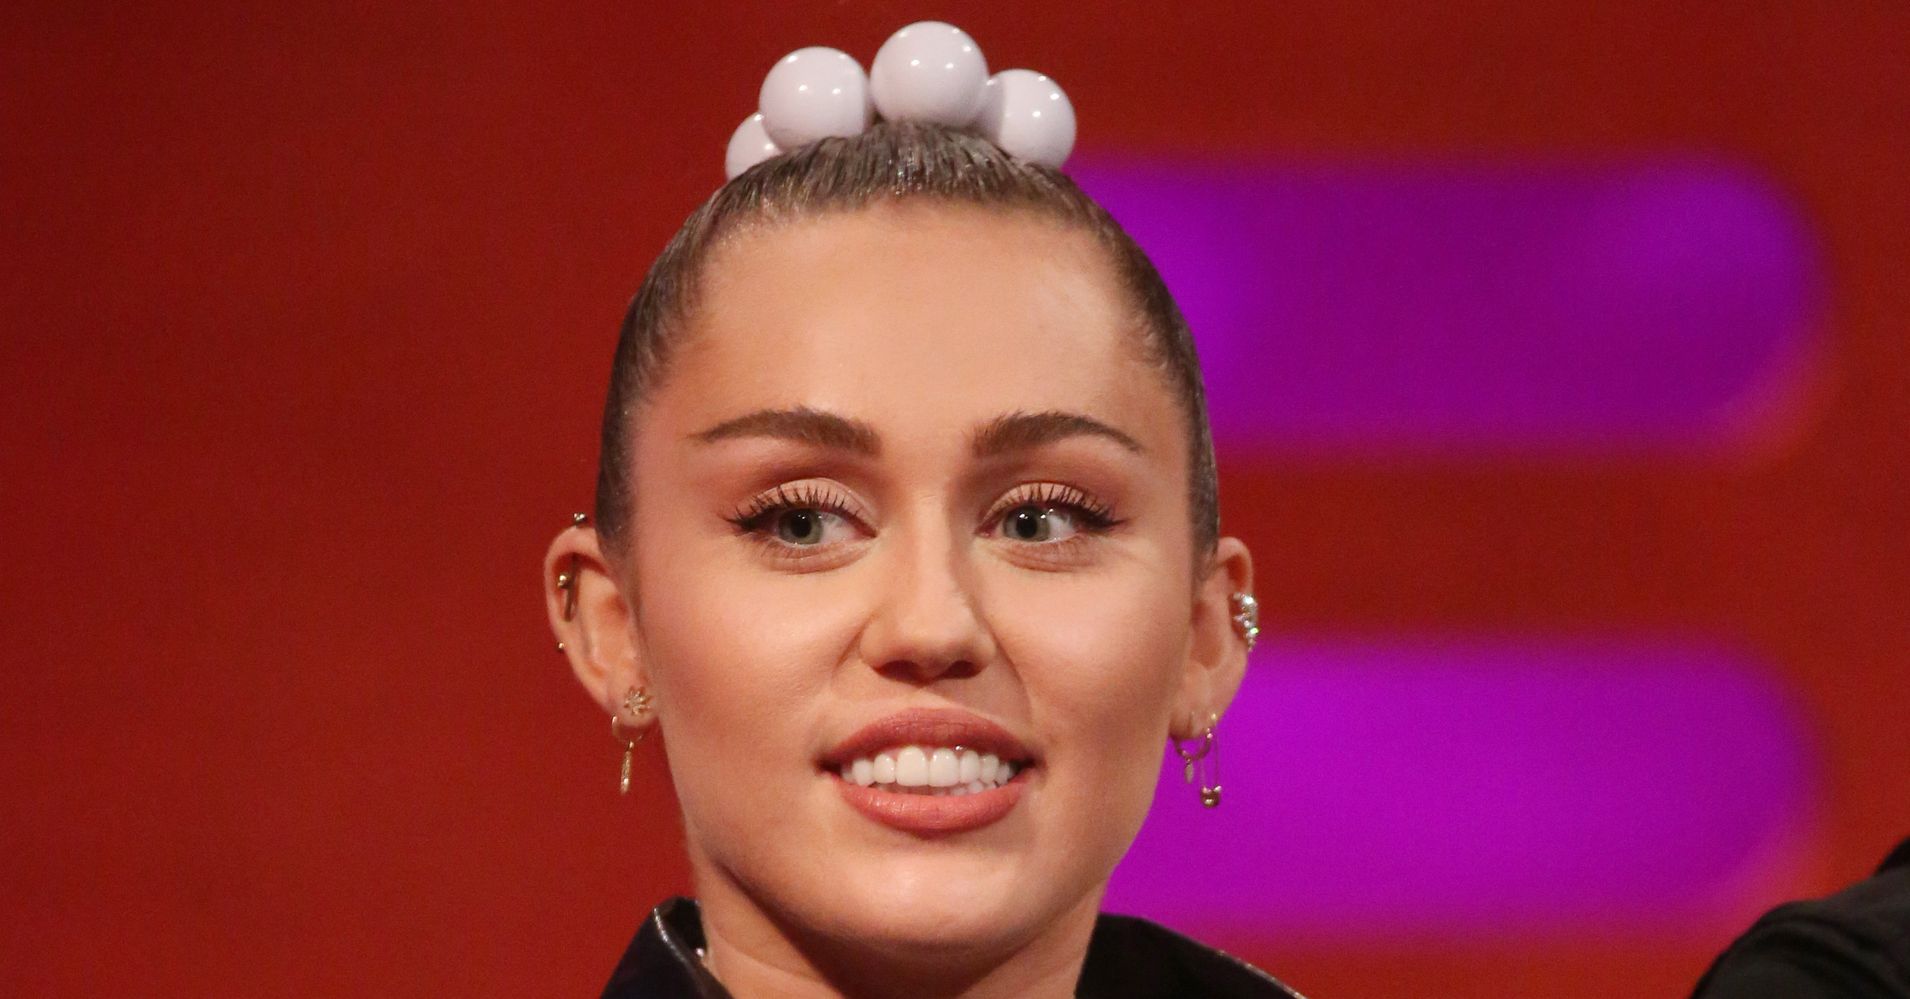 Miley Cyrus Shuts Down Pregnancy Rumors With Egg Cellent Response 7796